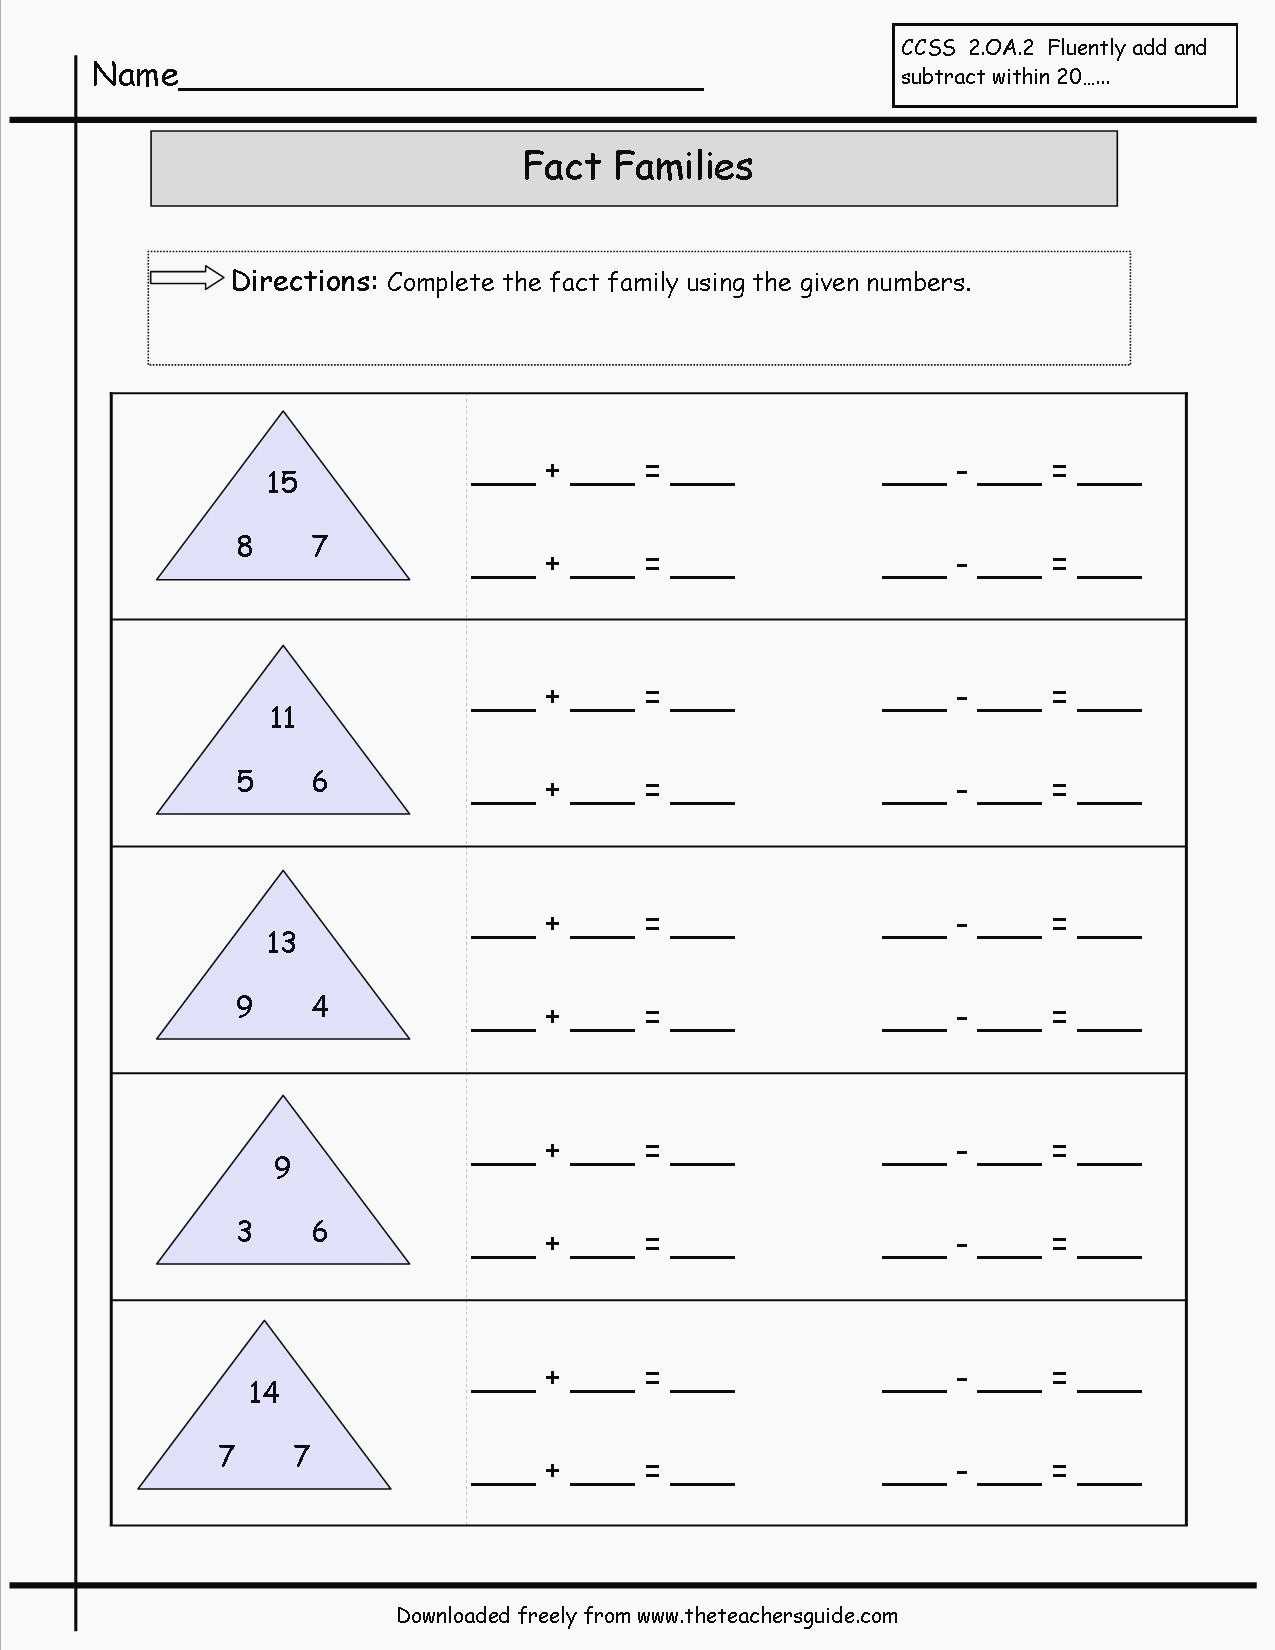 Nuclear Chemistry Worksheet together with Prime Numbers Worksheet Year 8 Wp Landingpages